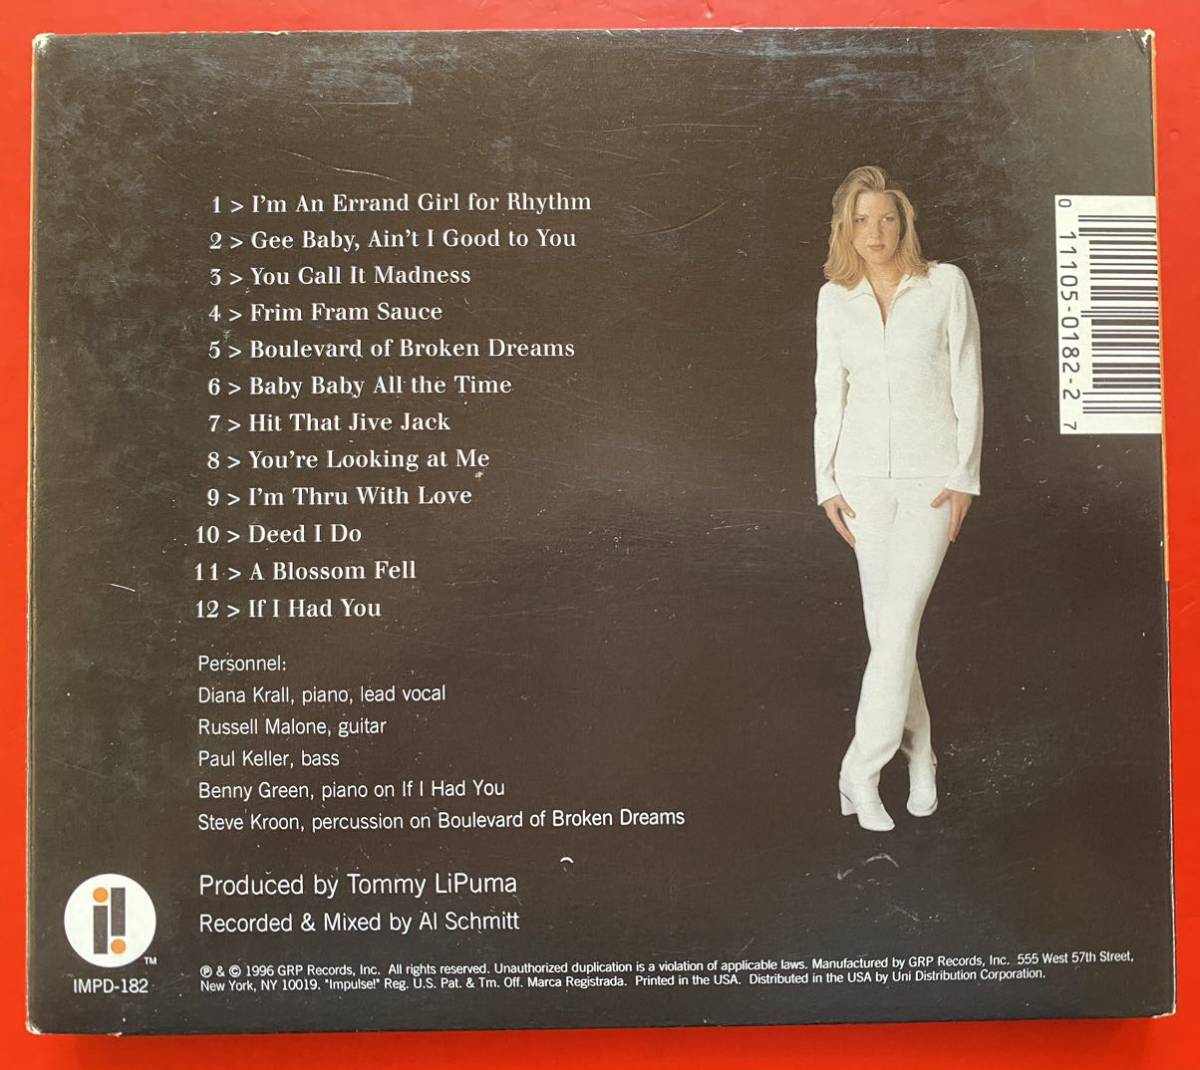 【CD】Diana Krall「All for You」ダイアナ・クラール 輸入盤 [11220440]_画像2